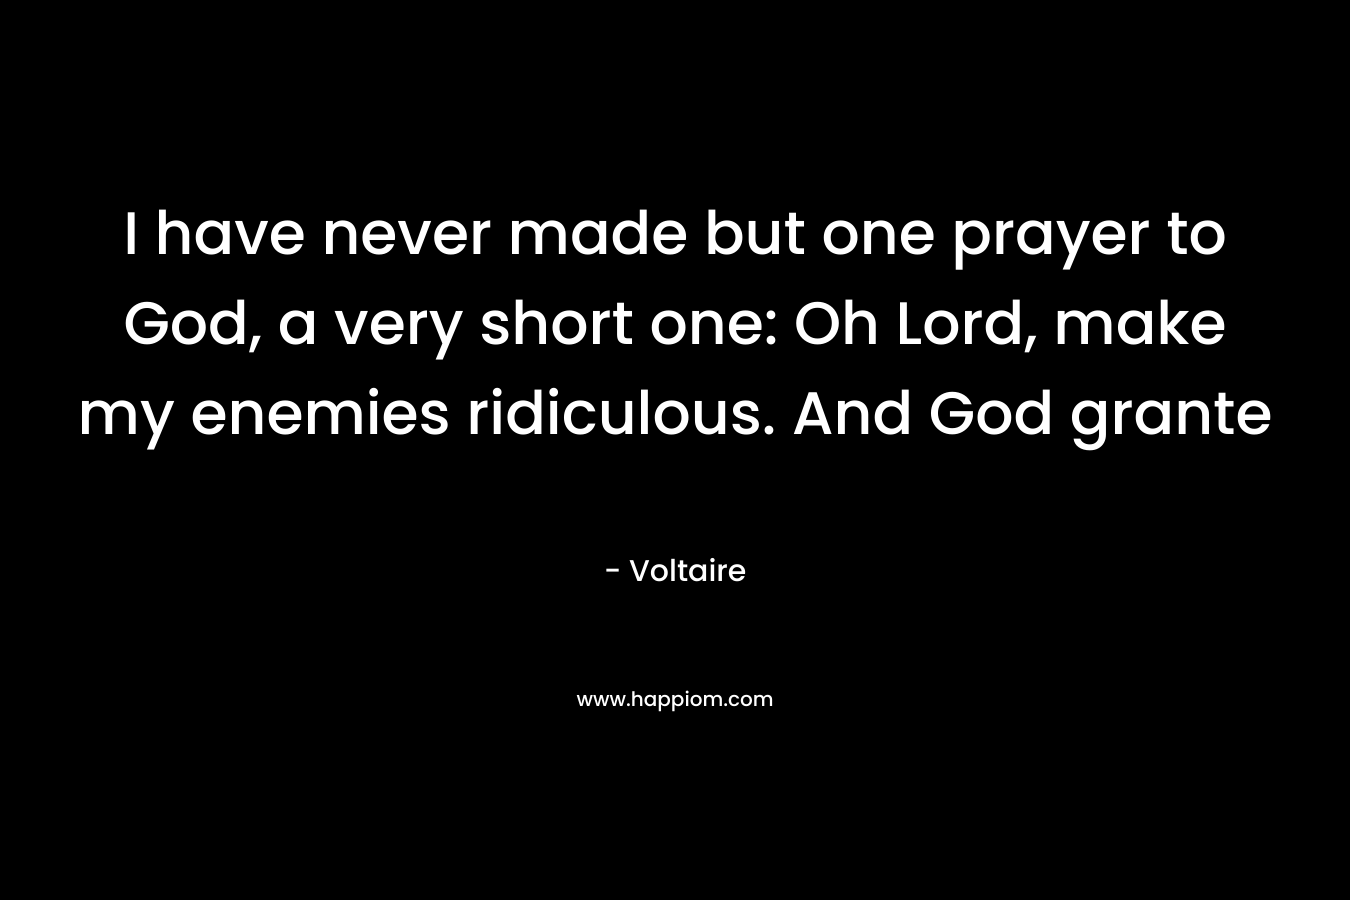 I have never made but one prayer to God, a very short one: Oh Lord, make my enemies ridiculous. And God grante – Voltaire